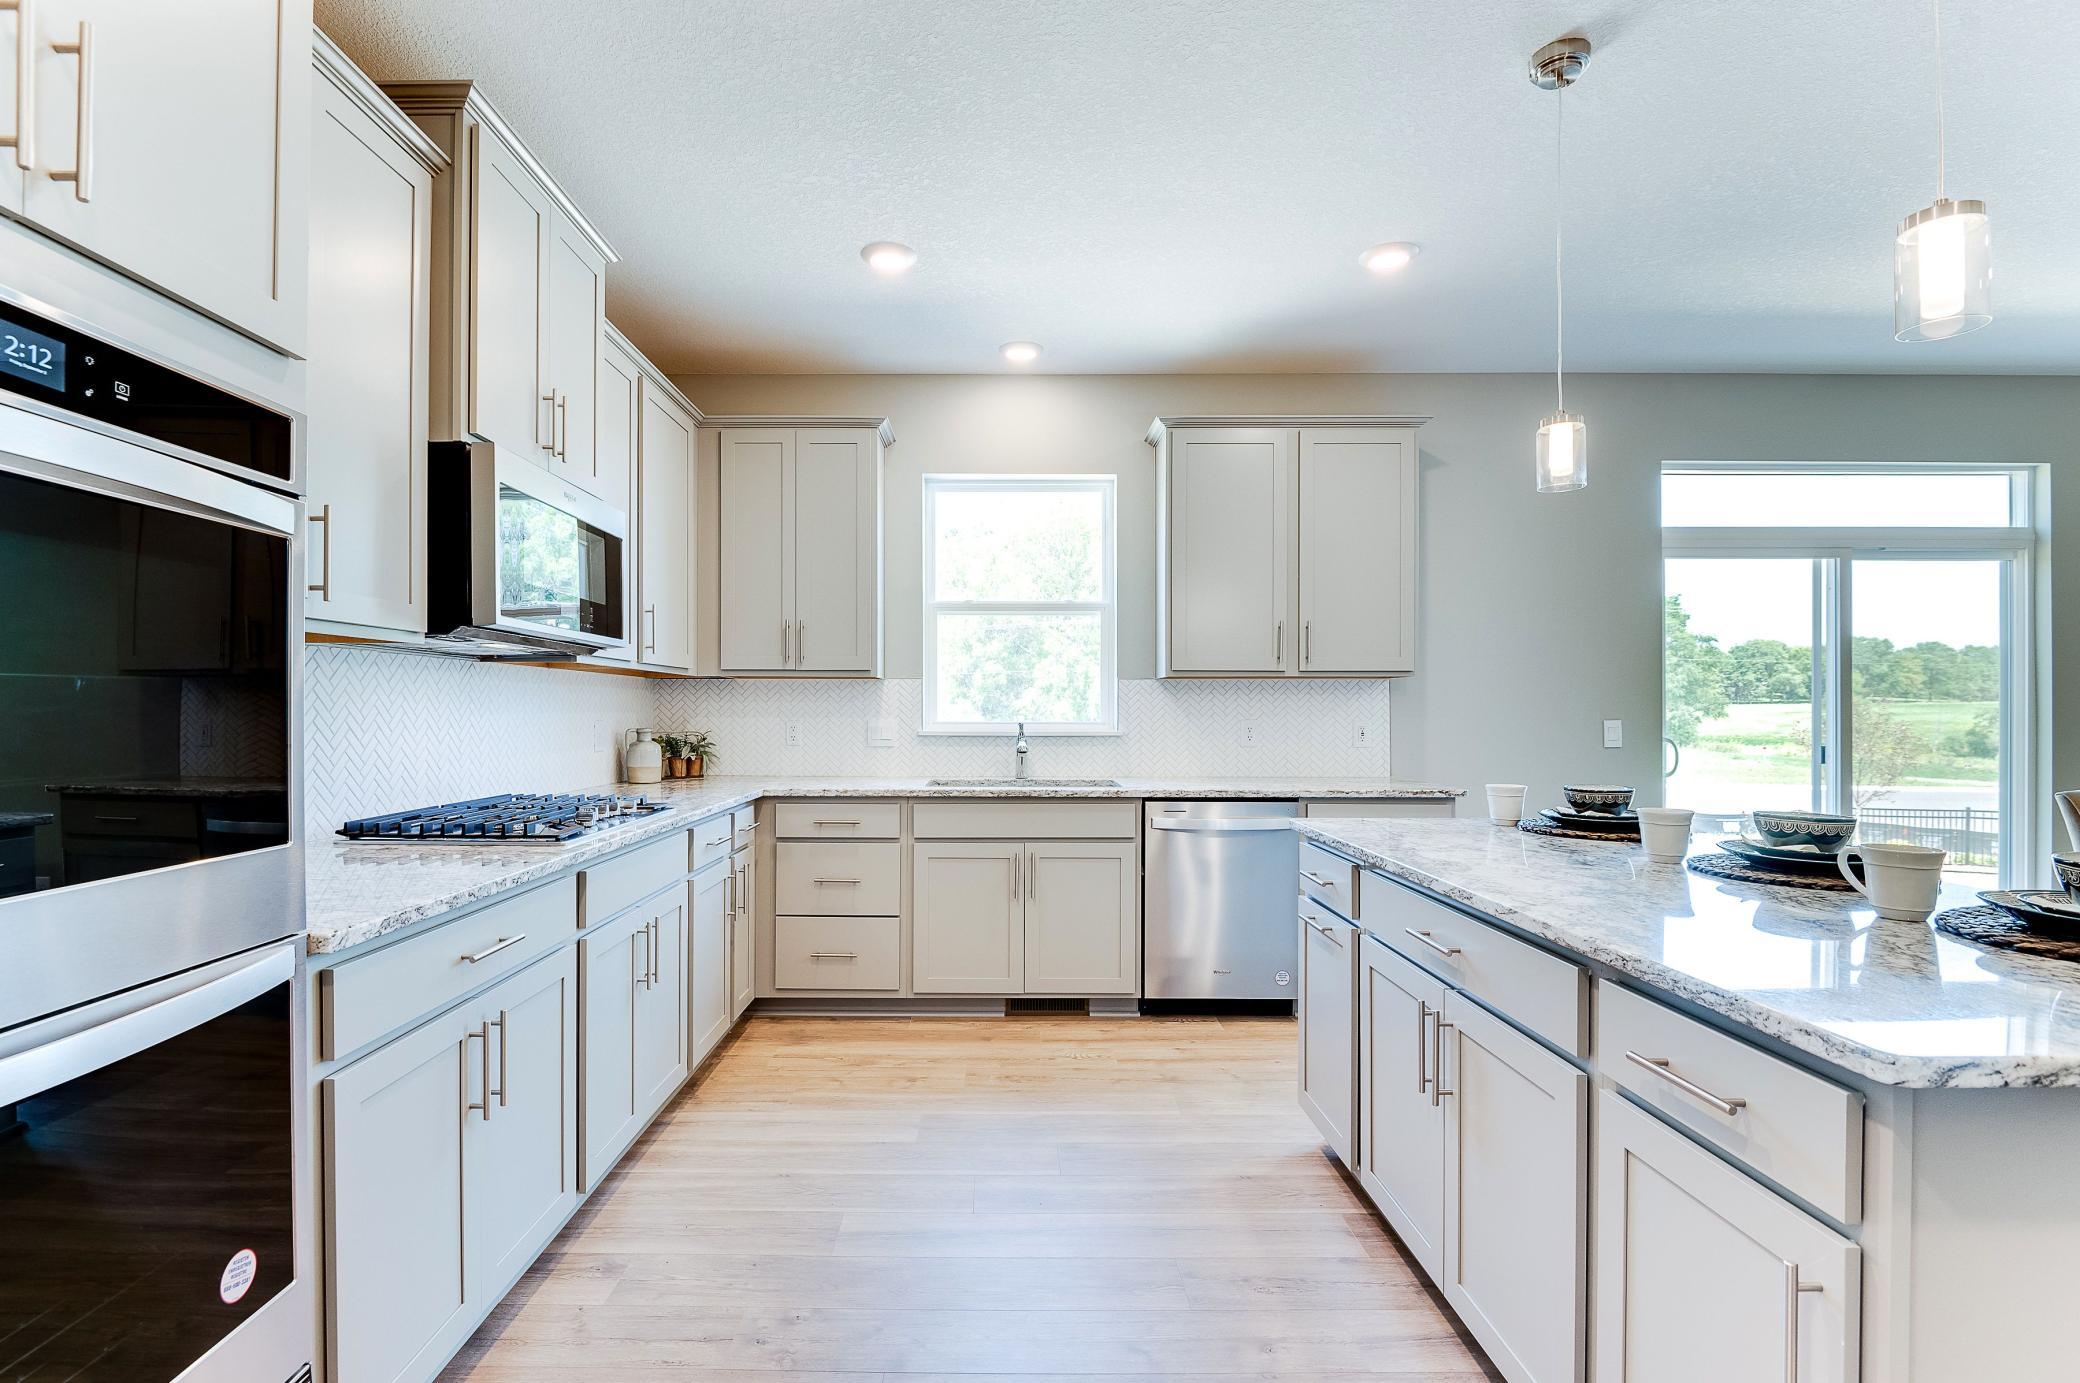 The kitchen of your dreams - complete with stunning Granite countertops, elegant backsplash, modern cabinetry & a stainless steal appliances that'll leave the family chef in their happy place! Photo of model home, color & options will vary.